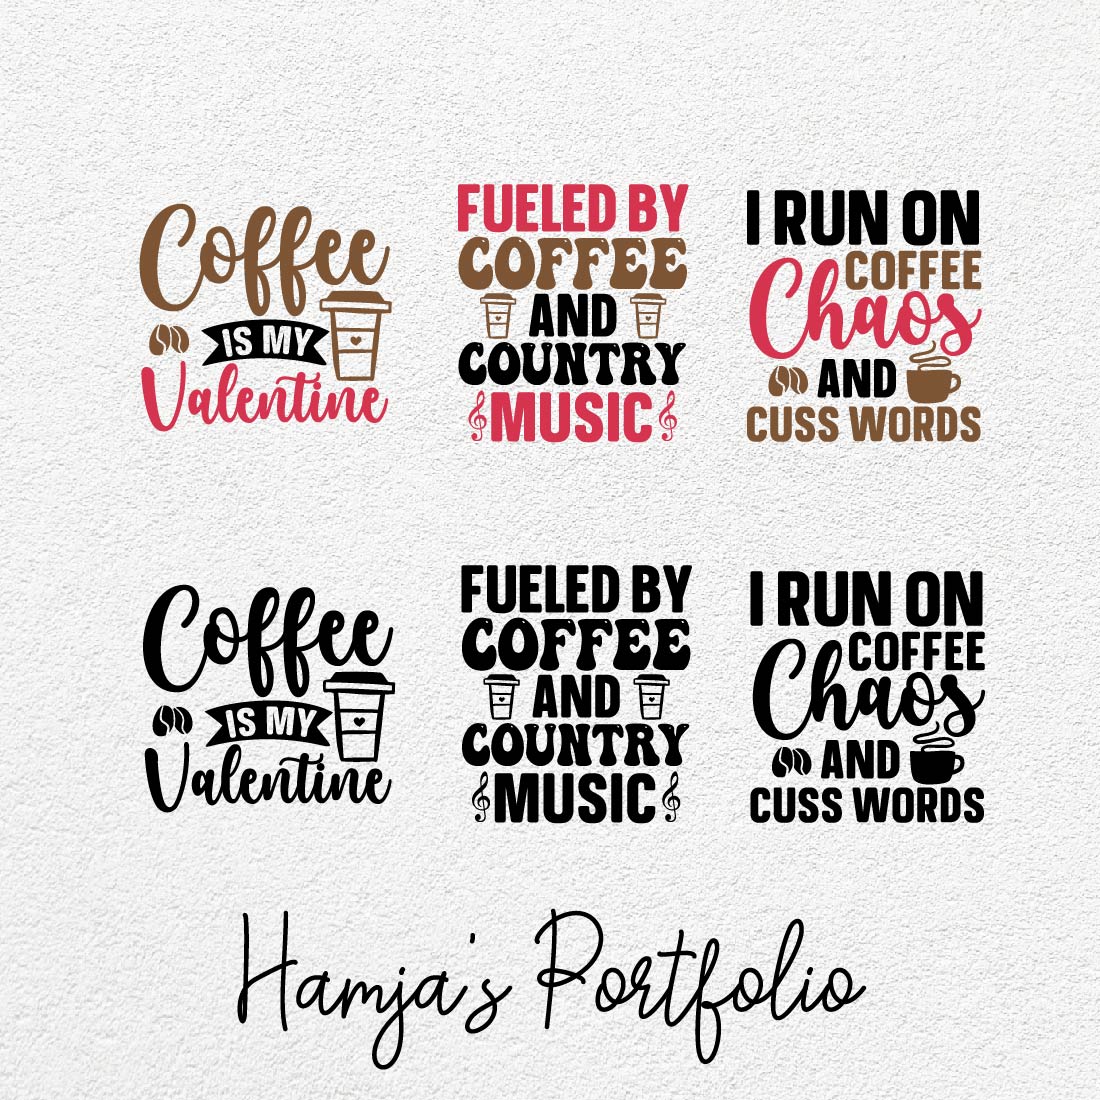 Coffee Typography Bundle cover image.